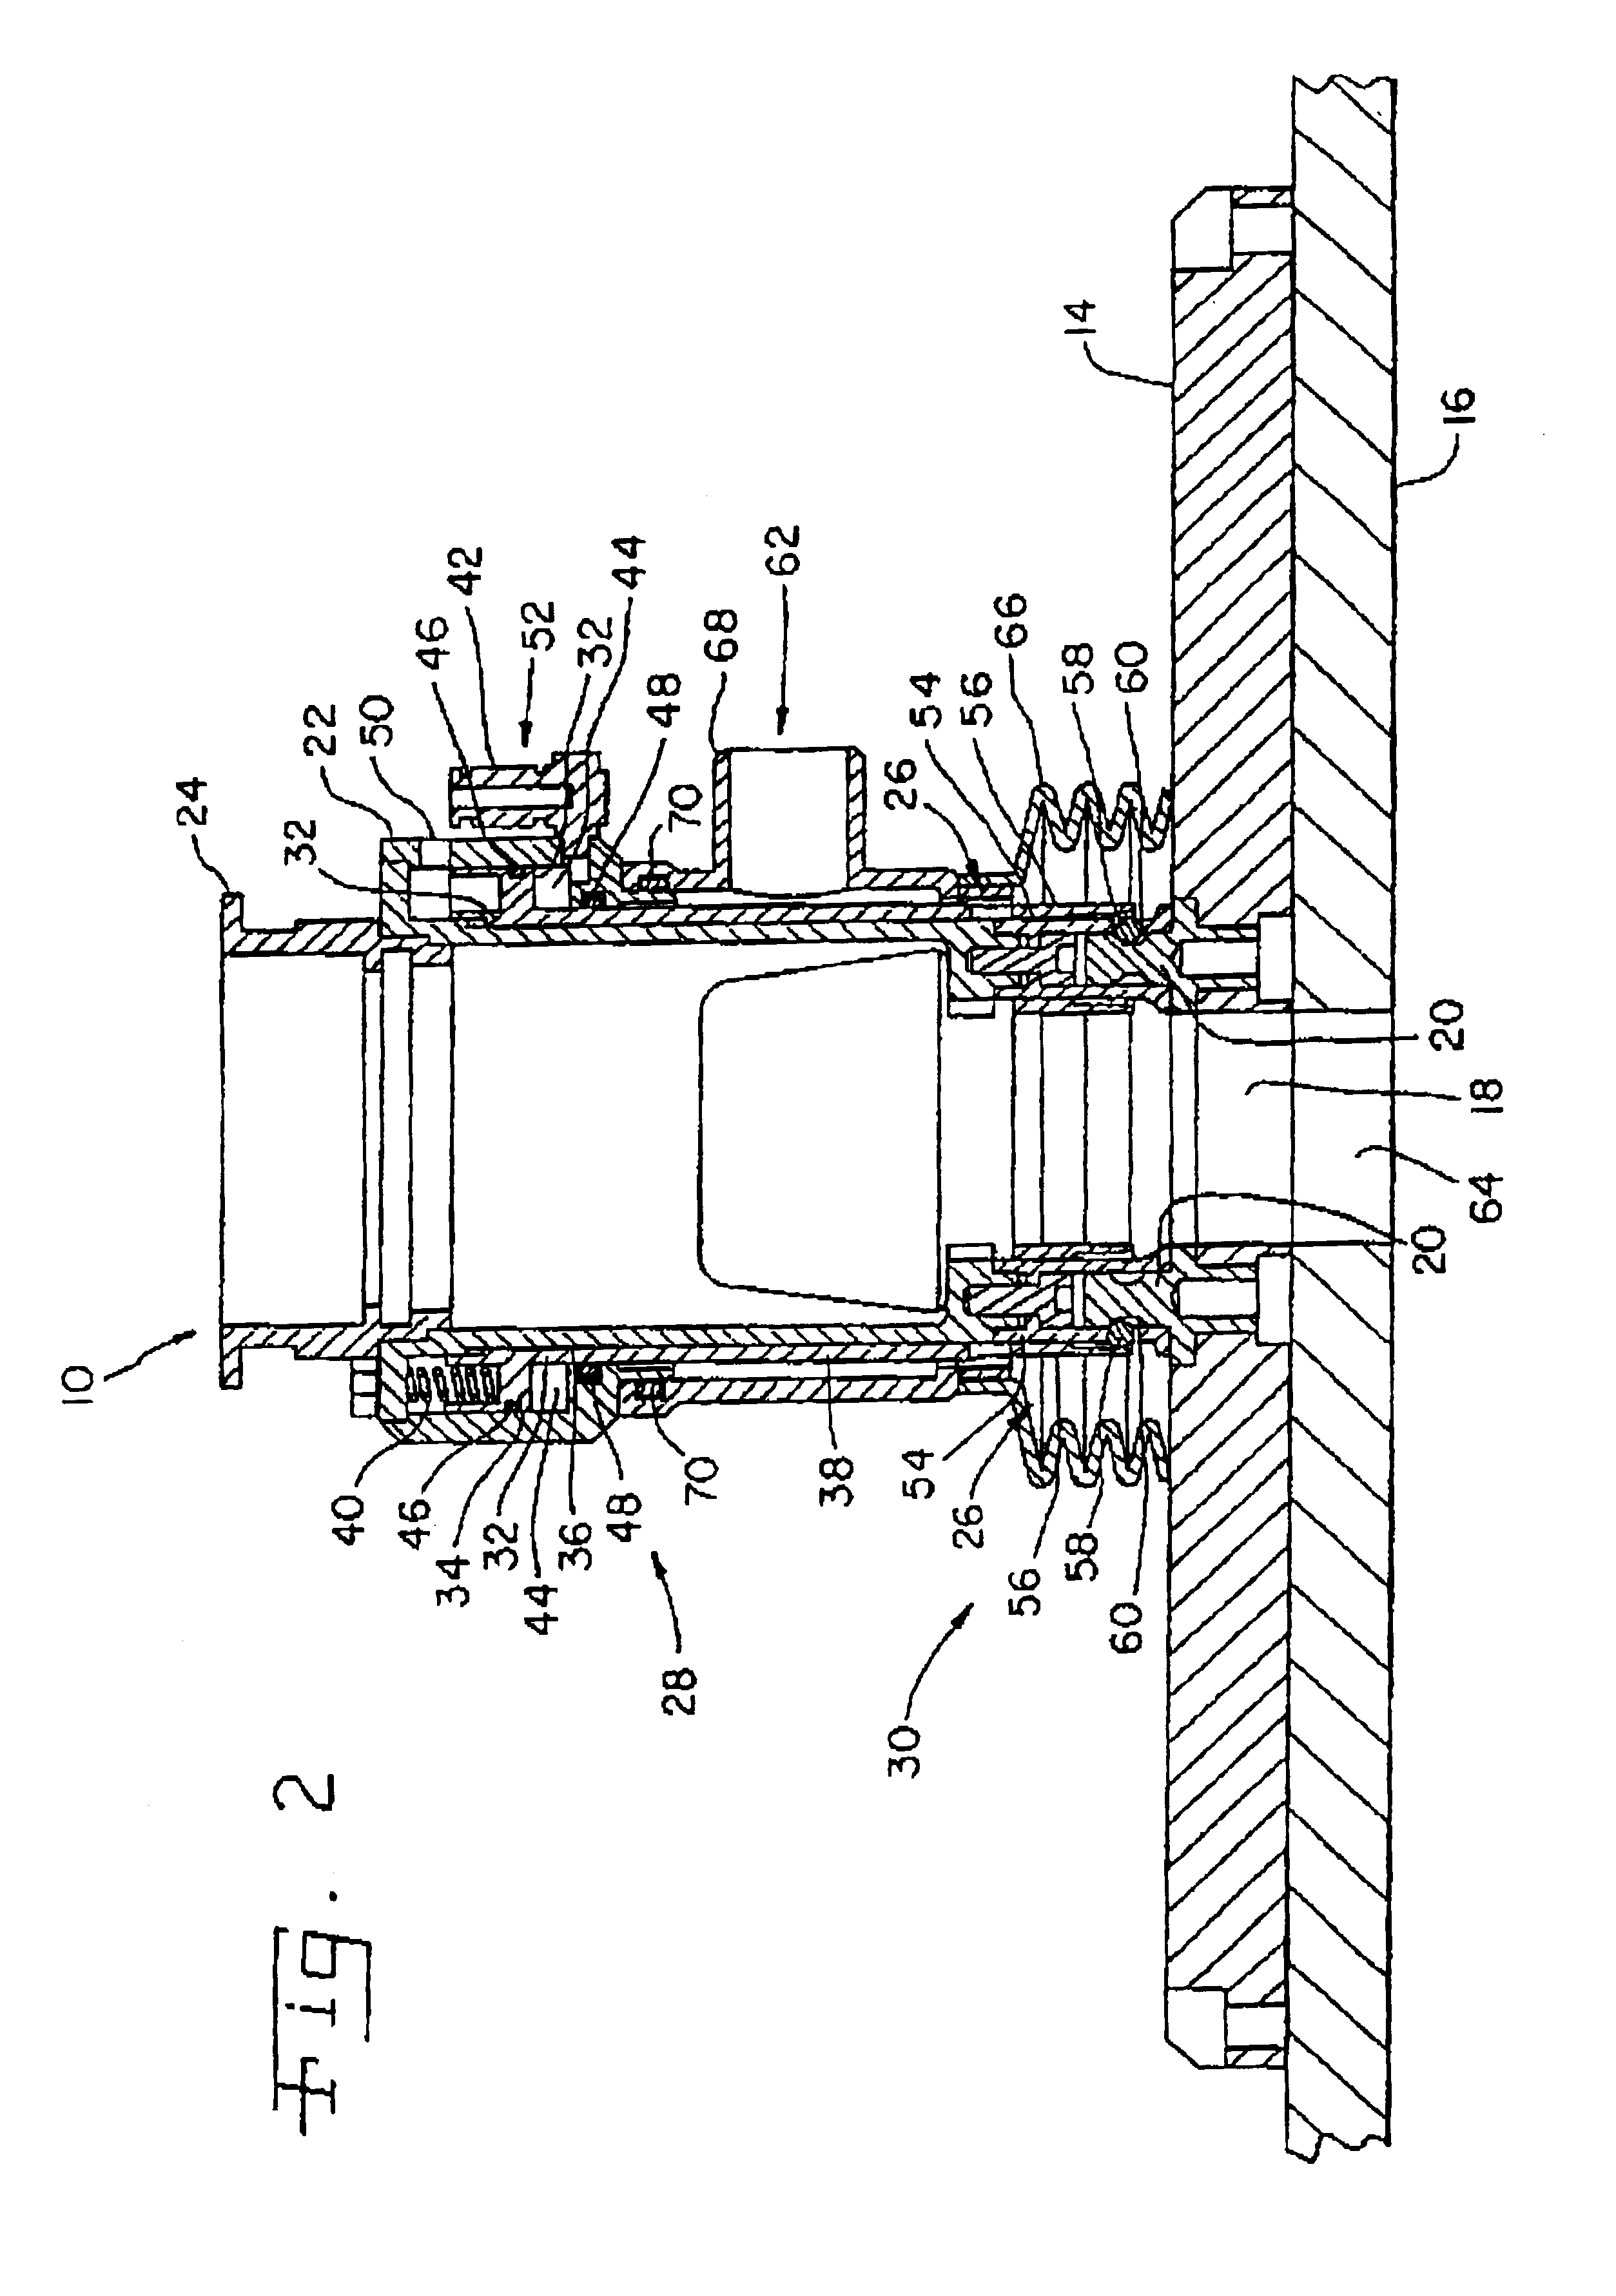 Fixation device for a portable orbital drilling unit